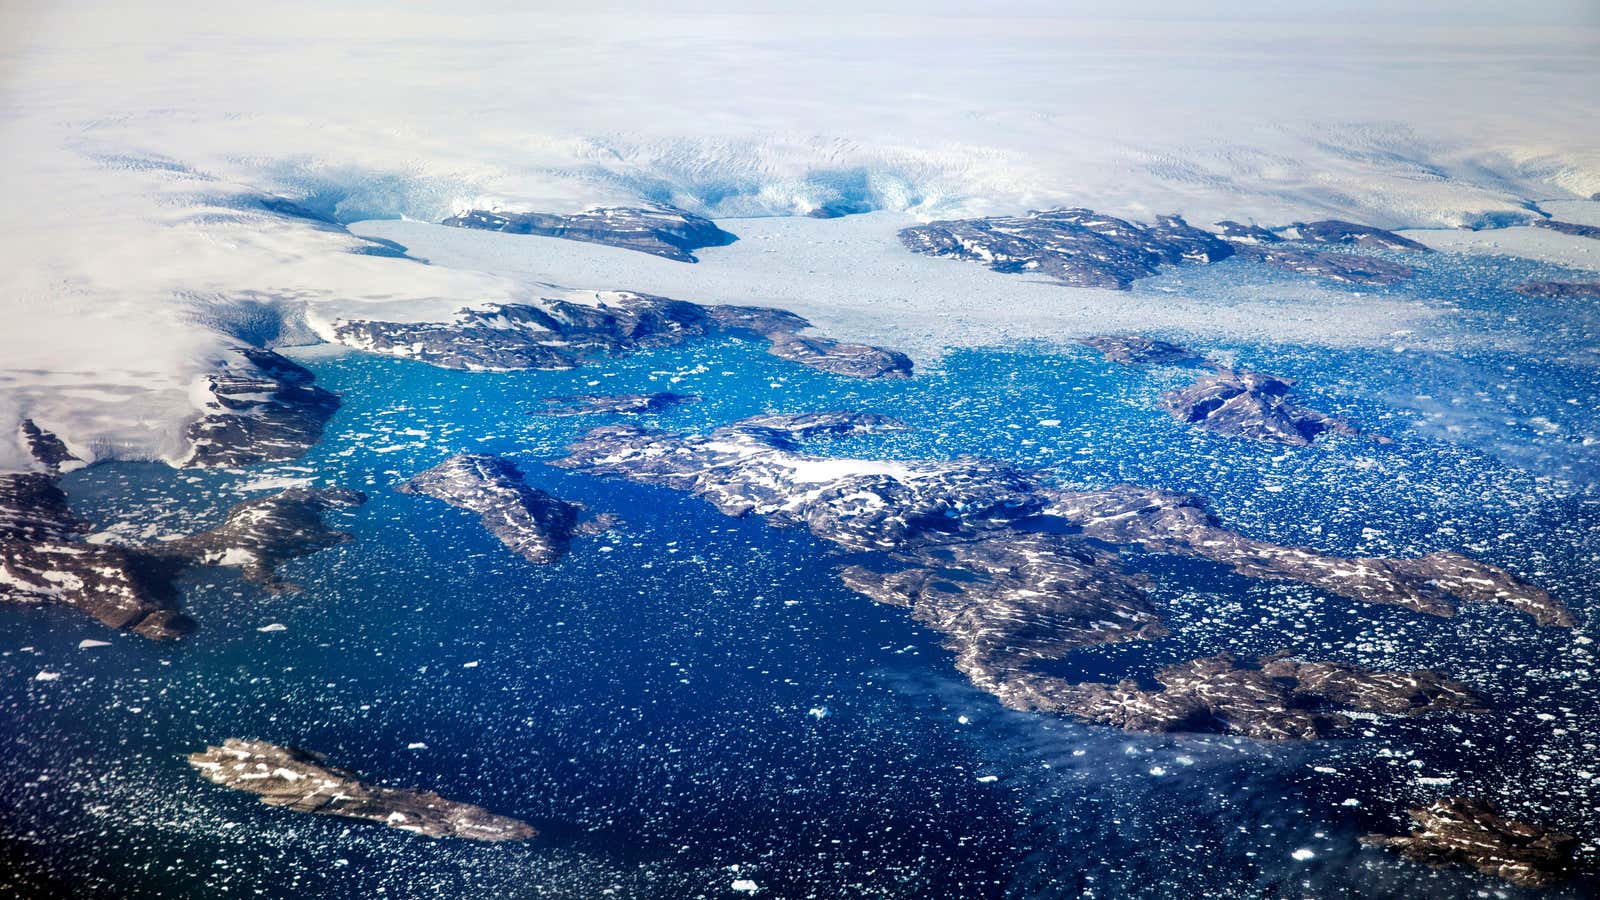 Greenland’s fjords are hiding warm waves.